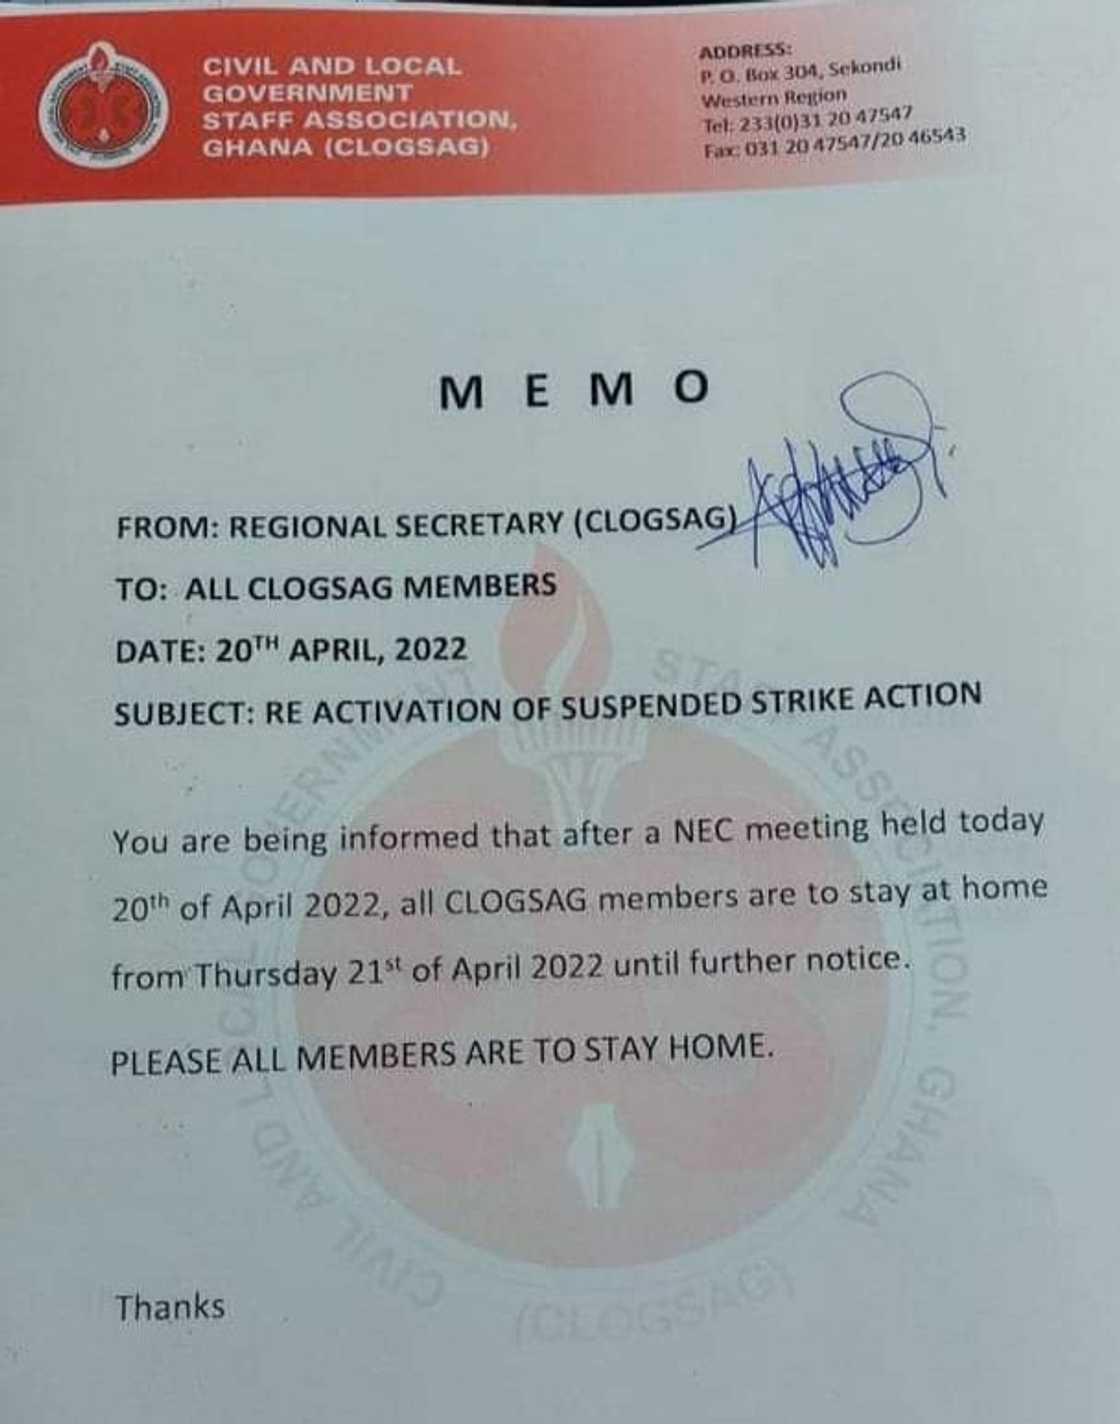 The brief memo by CLOSSAG to members